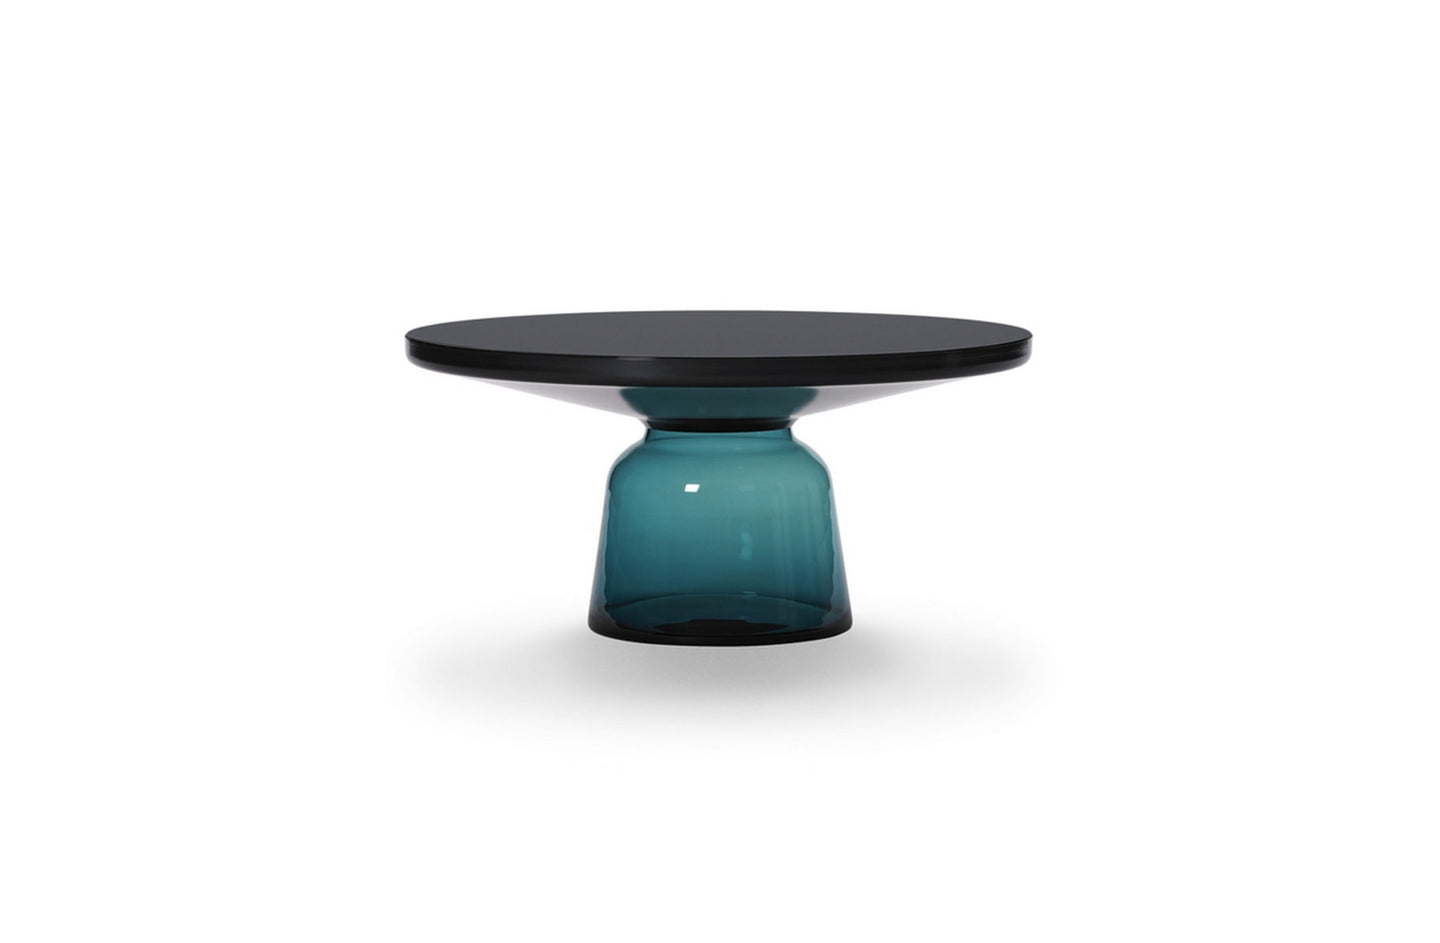 Bell Coffee Table - Black
